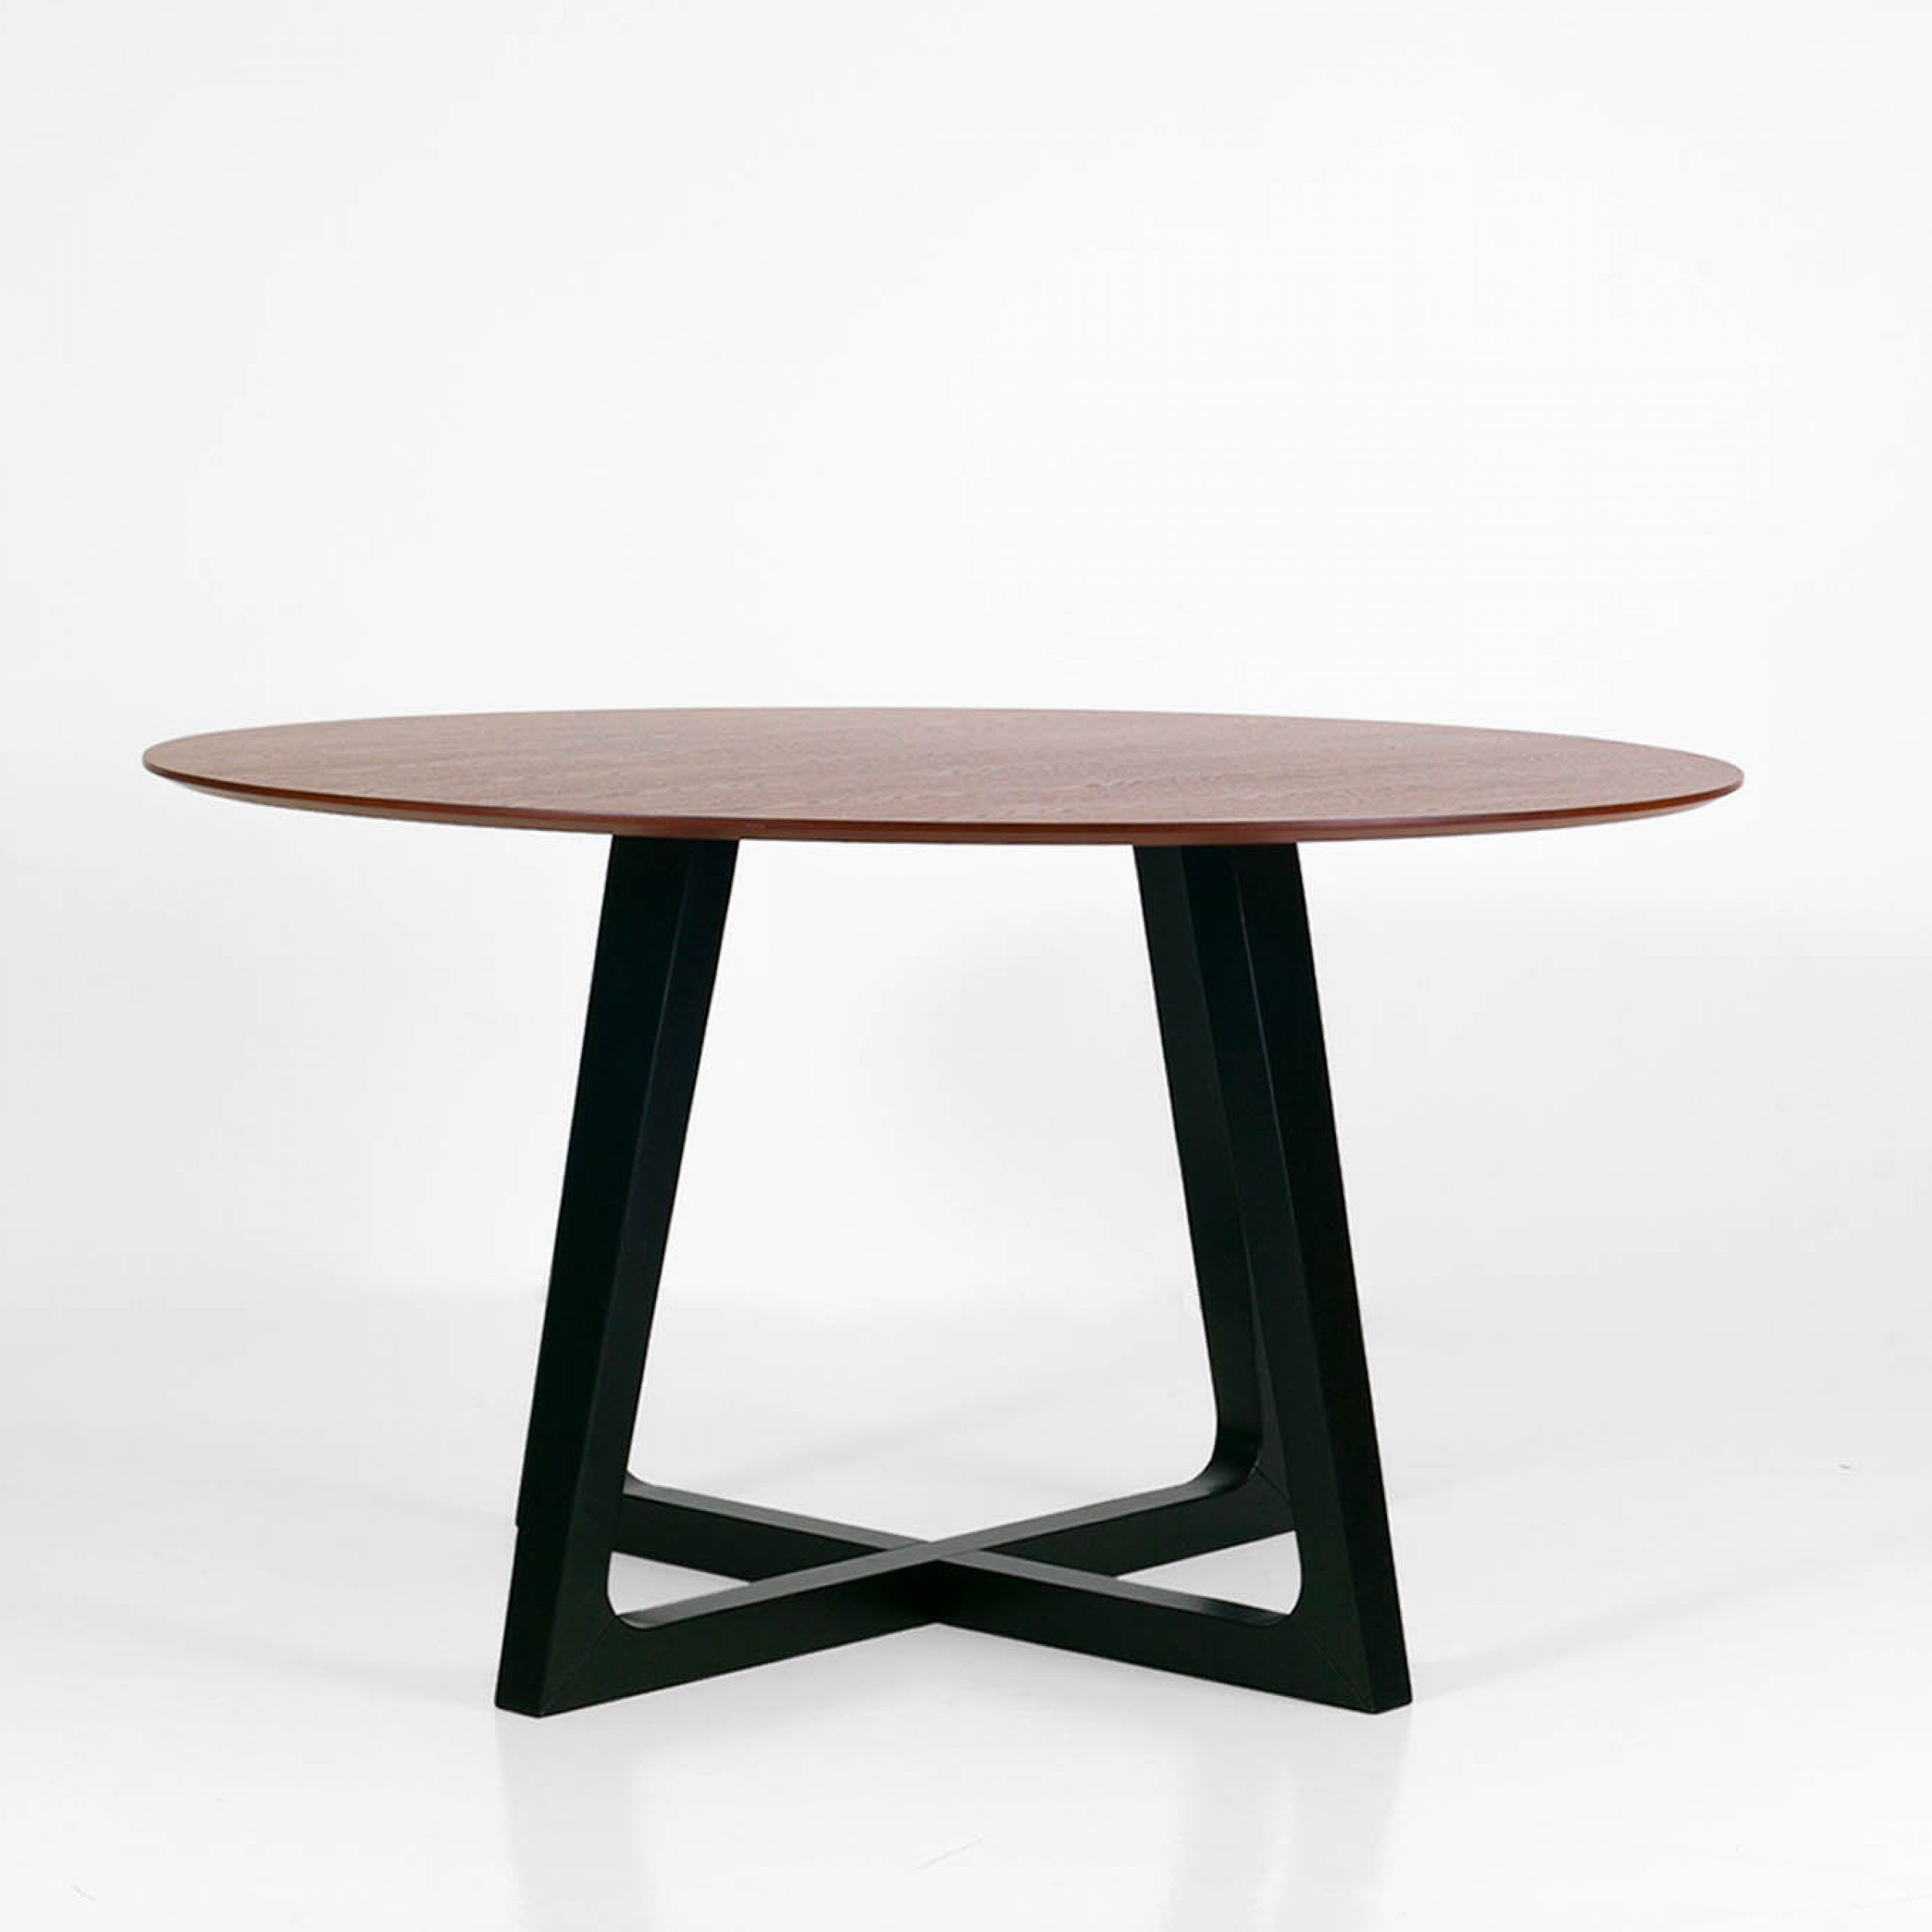 Shop For Blanda Round Dining Table Online! Regarding 2019 Rae Round Pedestal Dining Tables (View 25 of 25)